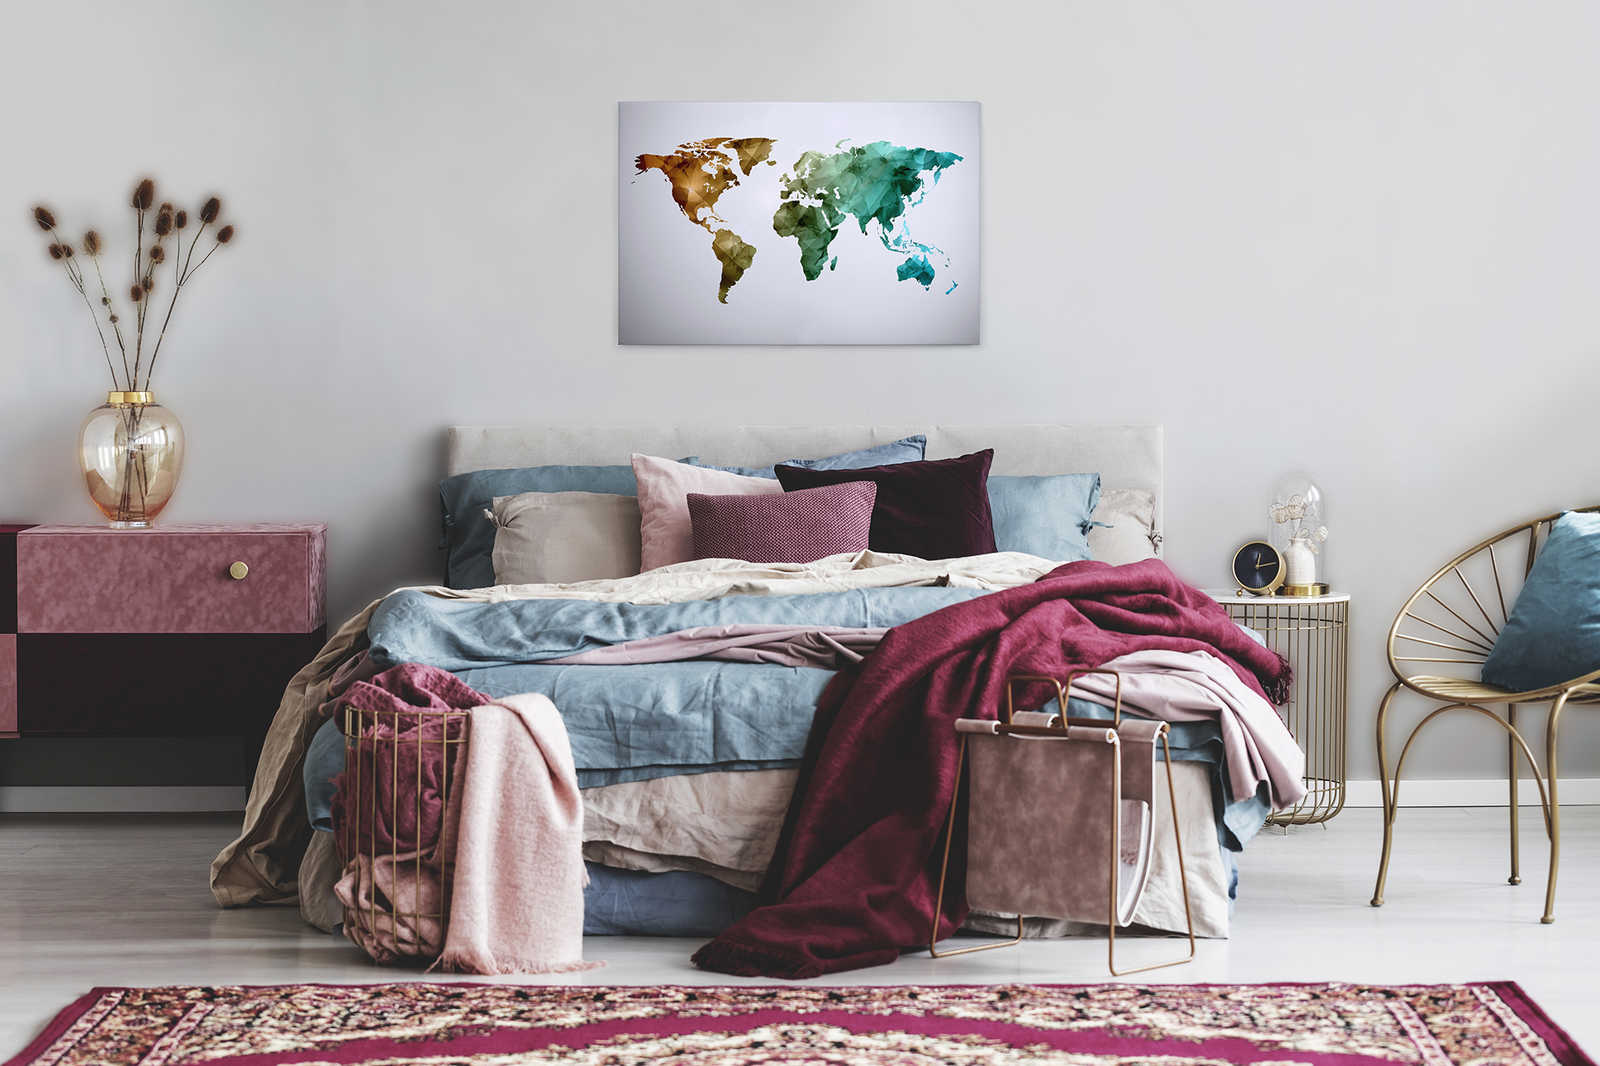             Canvas with world map made of graphic elements | WorldGrafic 1 - 0.90 m x 0.60 m
        